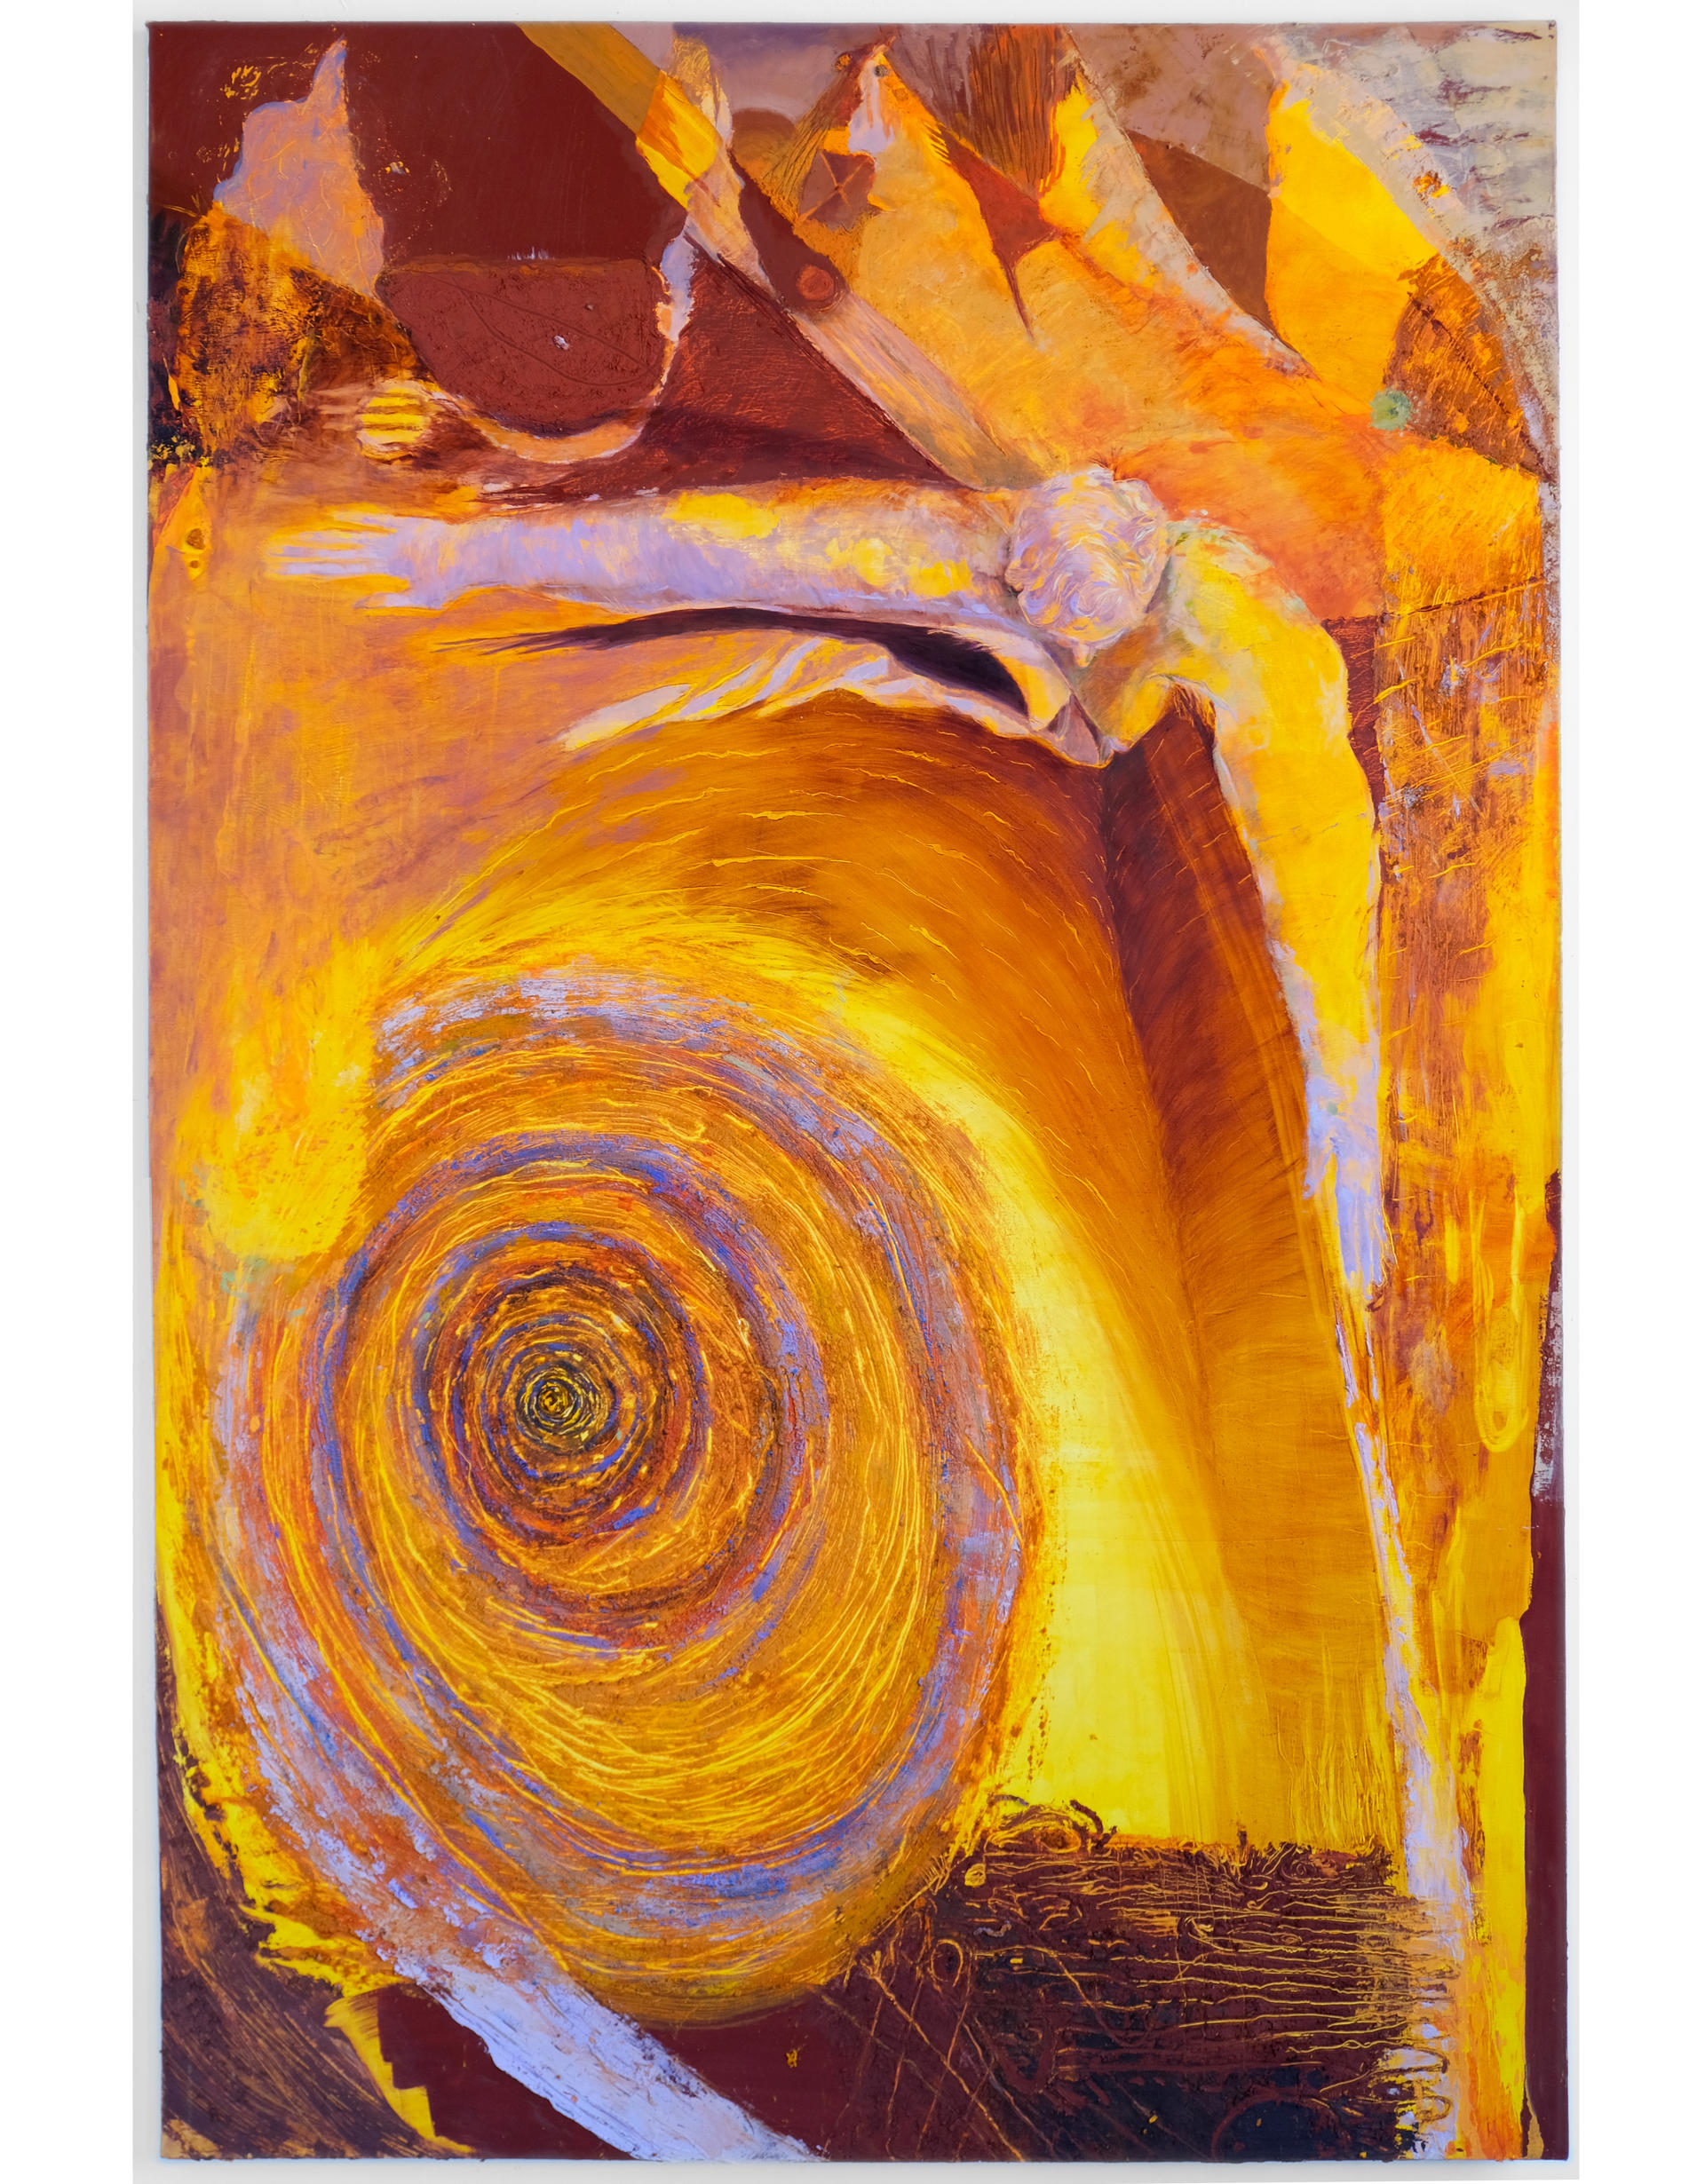 Photo of an oil painting in yellows, browns, and lavenders. There's an aerial view of a figure with outstretched arms and a large, crusty spiral. 